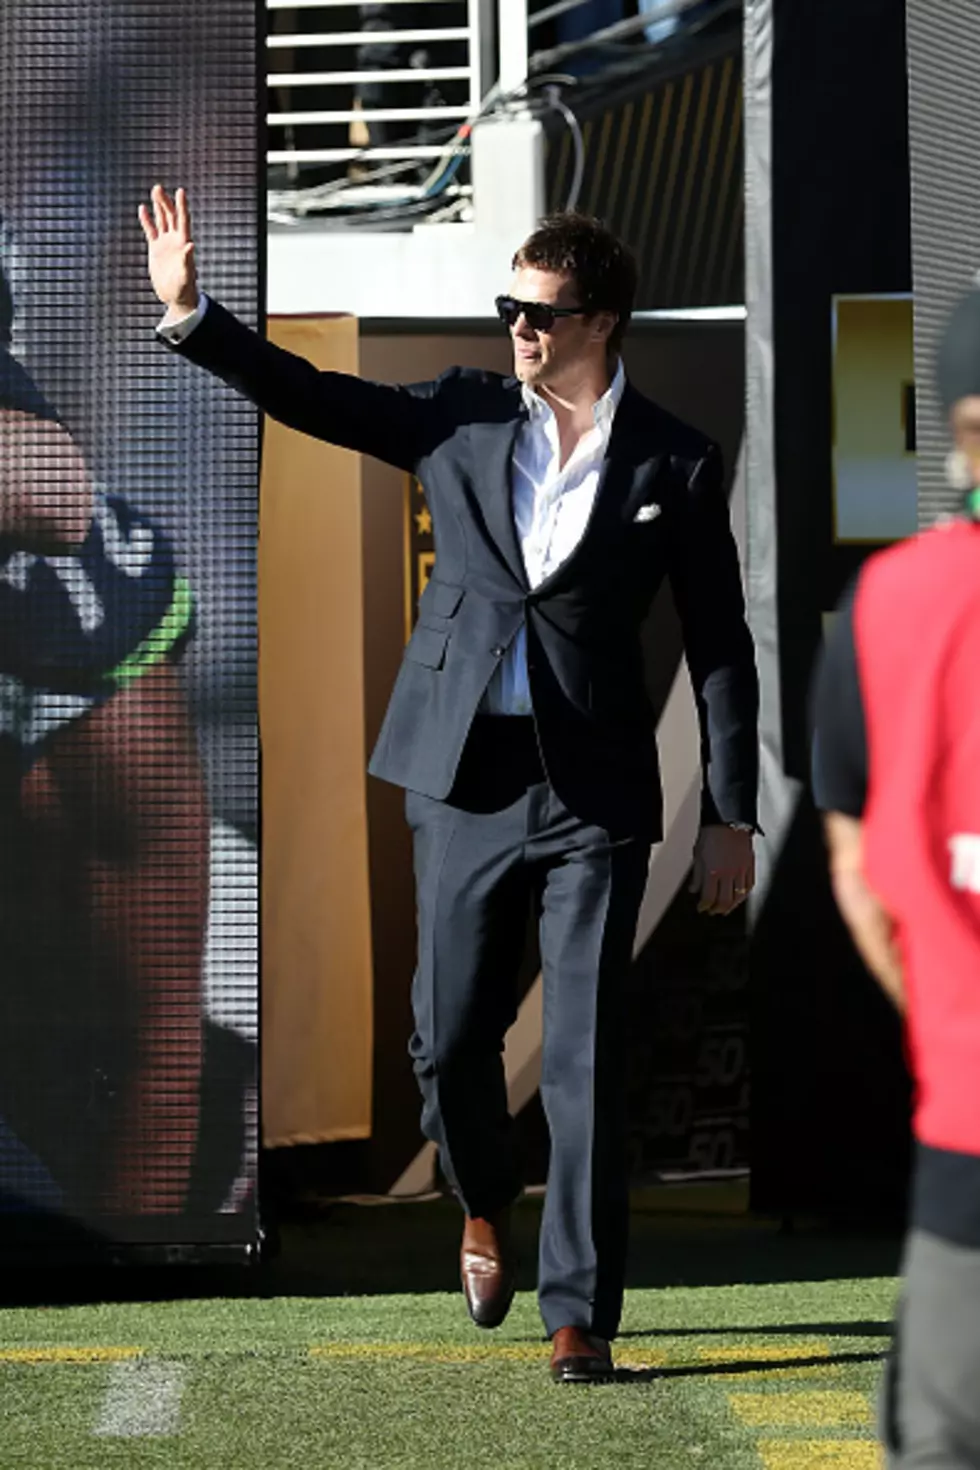 Boos Welcome Tom Brady at Super Bowl [VIDEO]